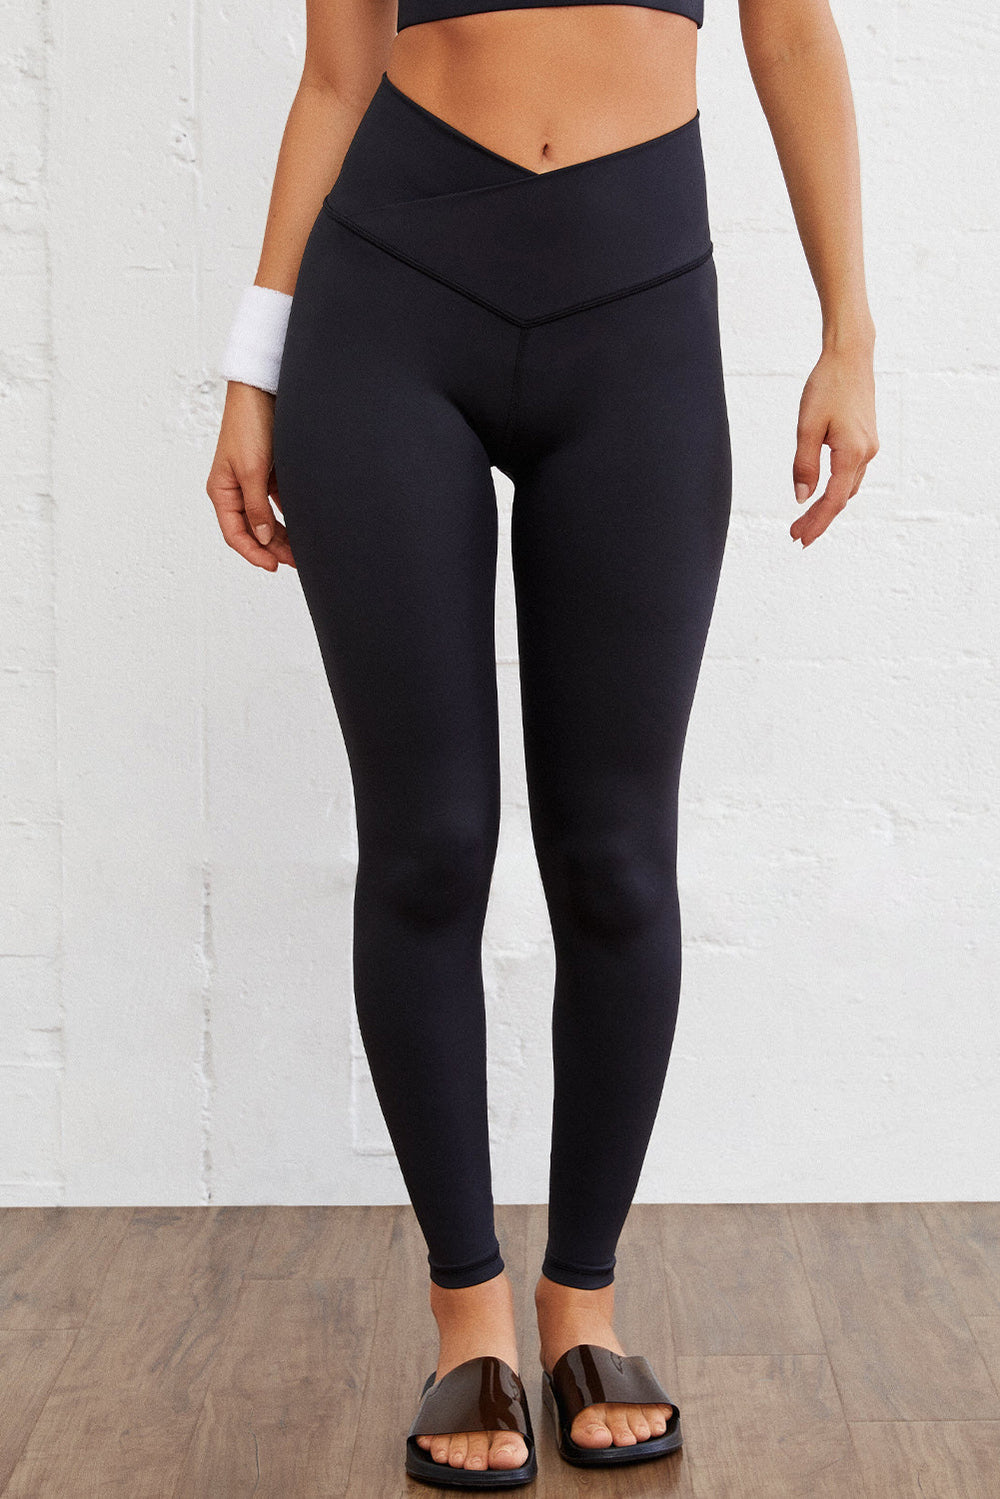 The802Gypsy  Activewear Black / S / 75%Polyamide+25%Elastane TRAVELING Gypsy-Arched Waist Seamless Active Leggings